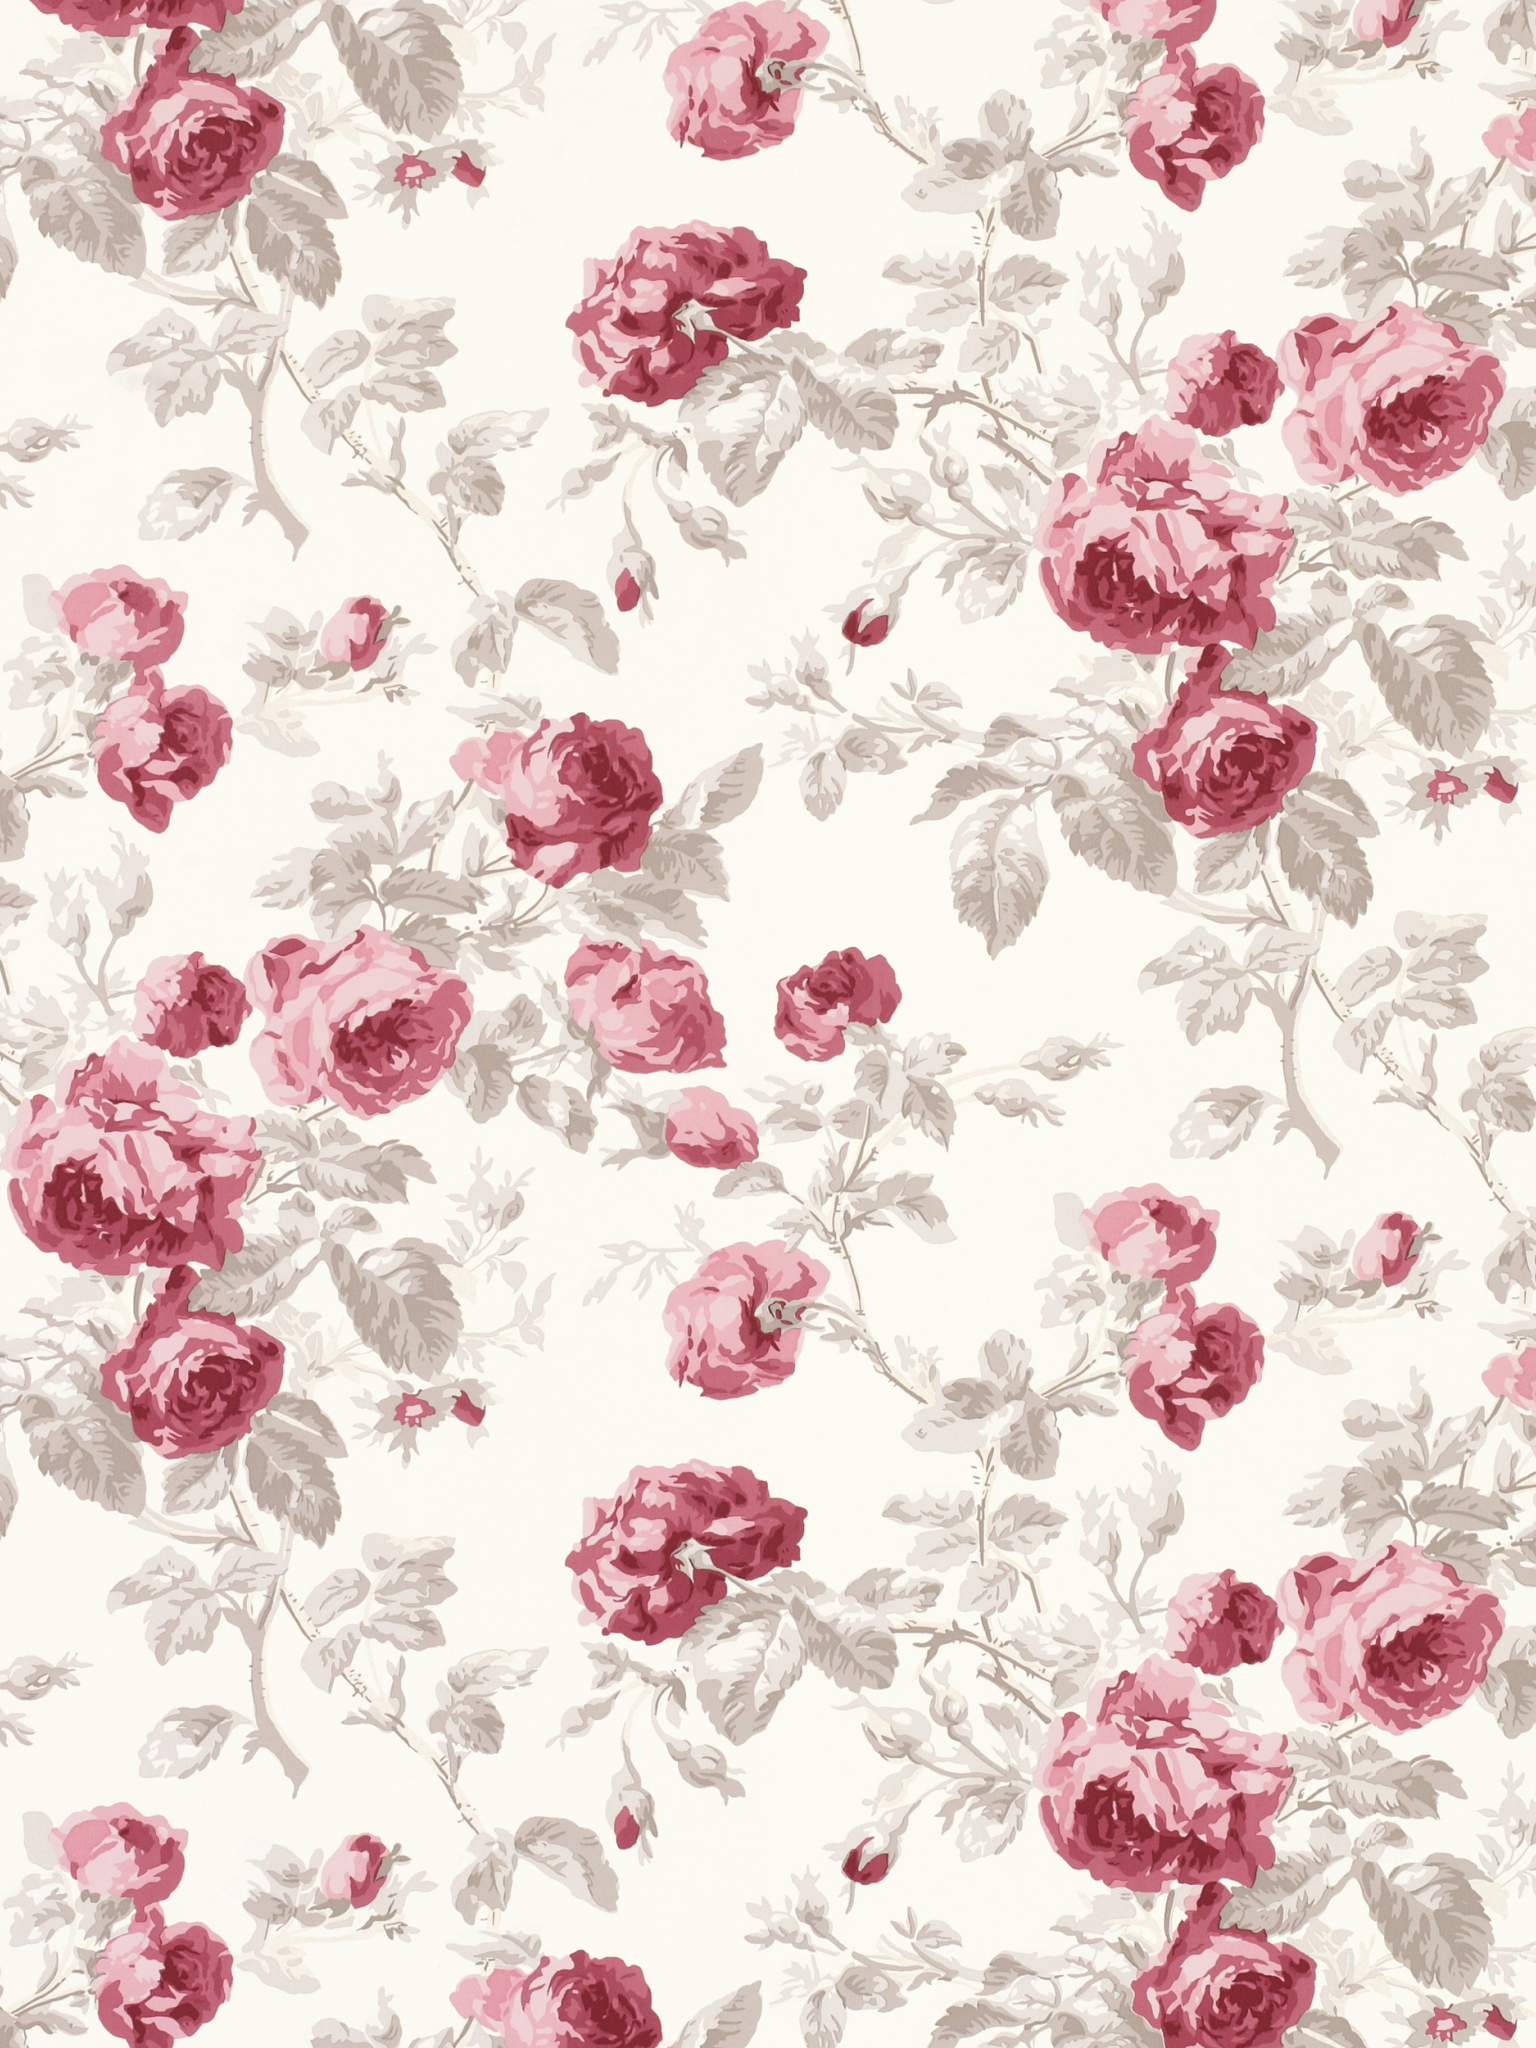 Free download Home E pood Wallpaper Roses Cassis [2500x2500] for your Desktop, Mobile & Tablet. Explore Flower Print Wallpaper Roses. Rose Flowers Wallpaper Free Download, Roses Wallpaper for Desktop